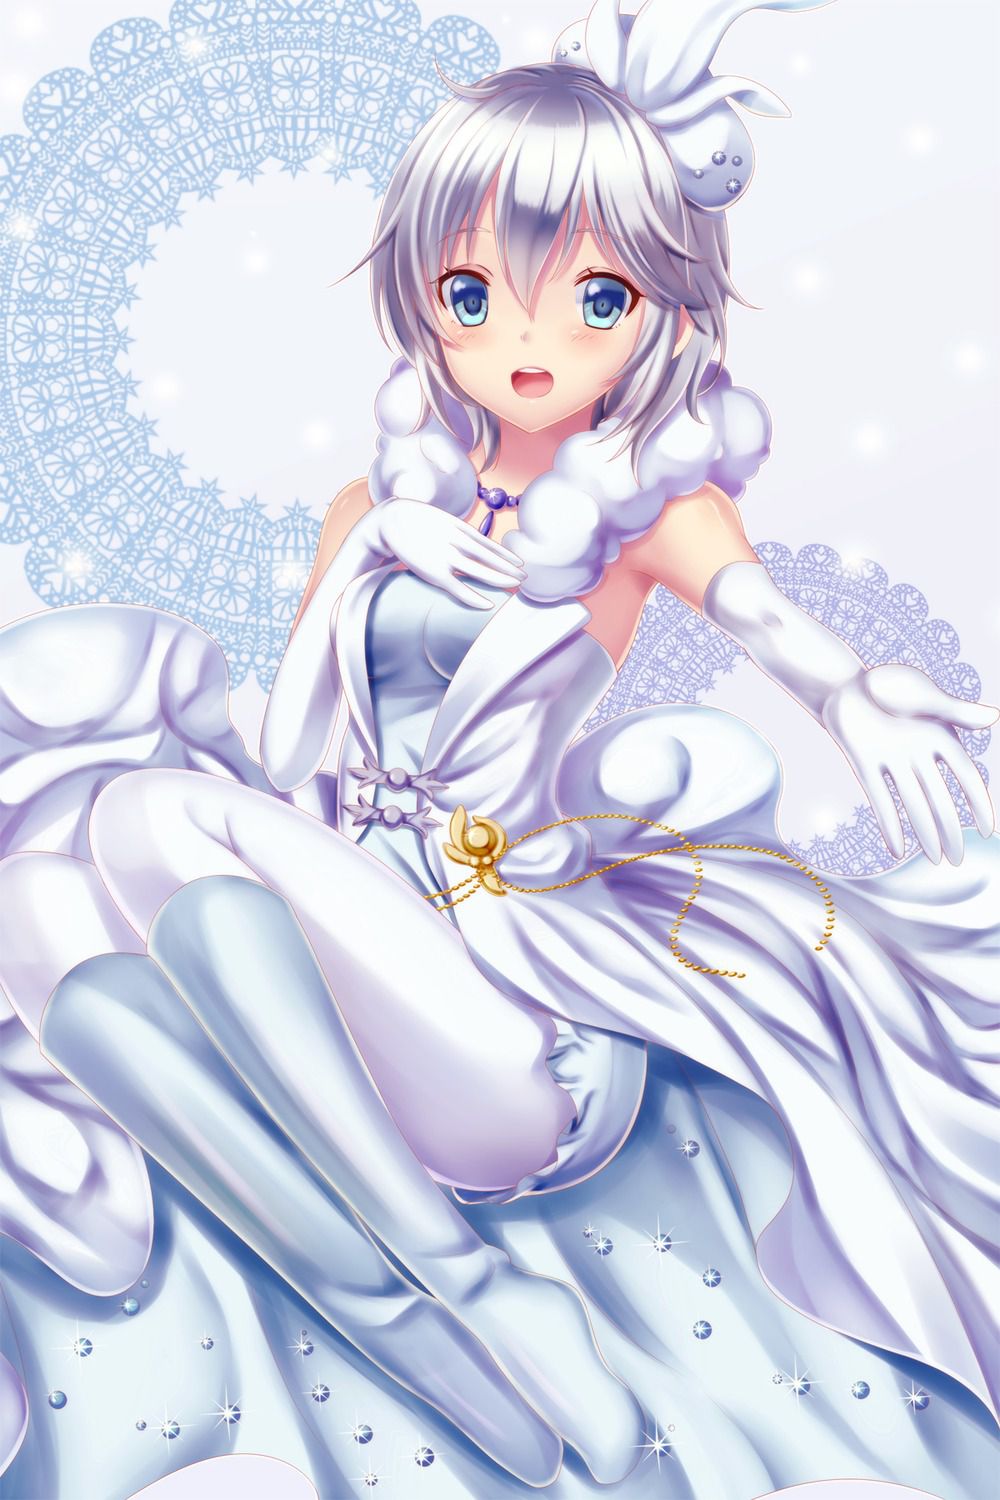 【Idol Master】I will put an anastasia's erotic cute images together for free ☆ 18